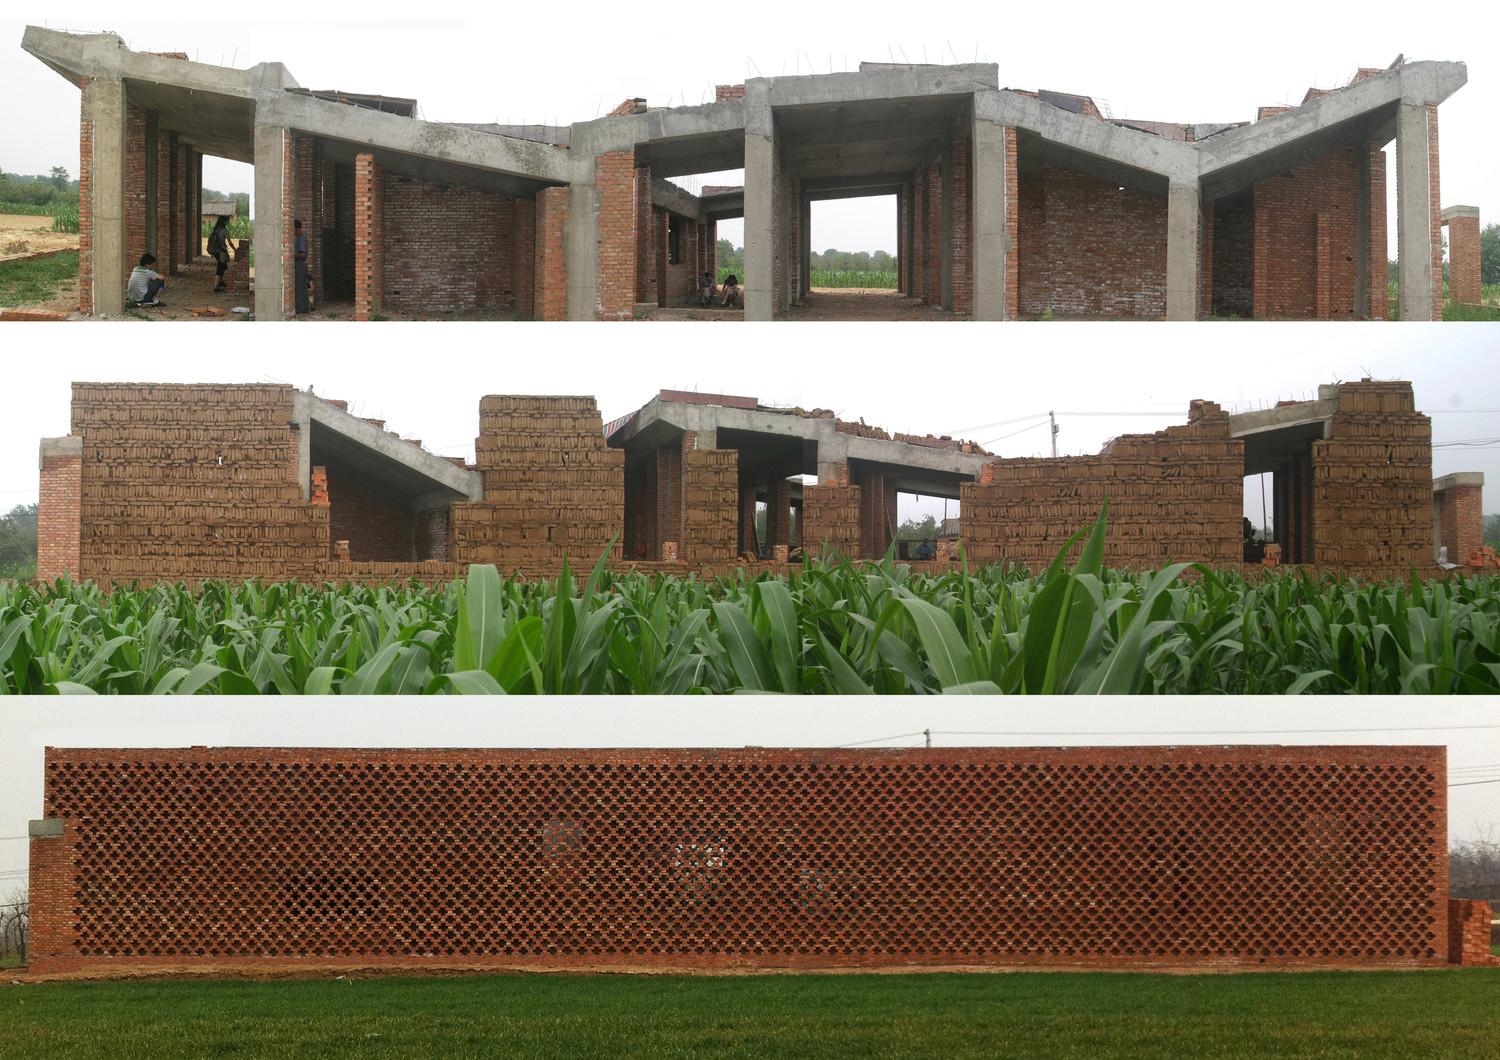 Construction in progress : from concrete framework to finished brick façade with mud brick infill